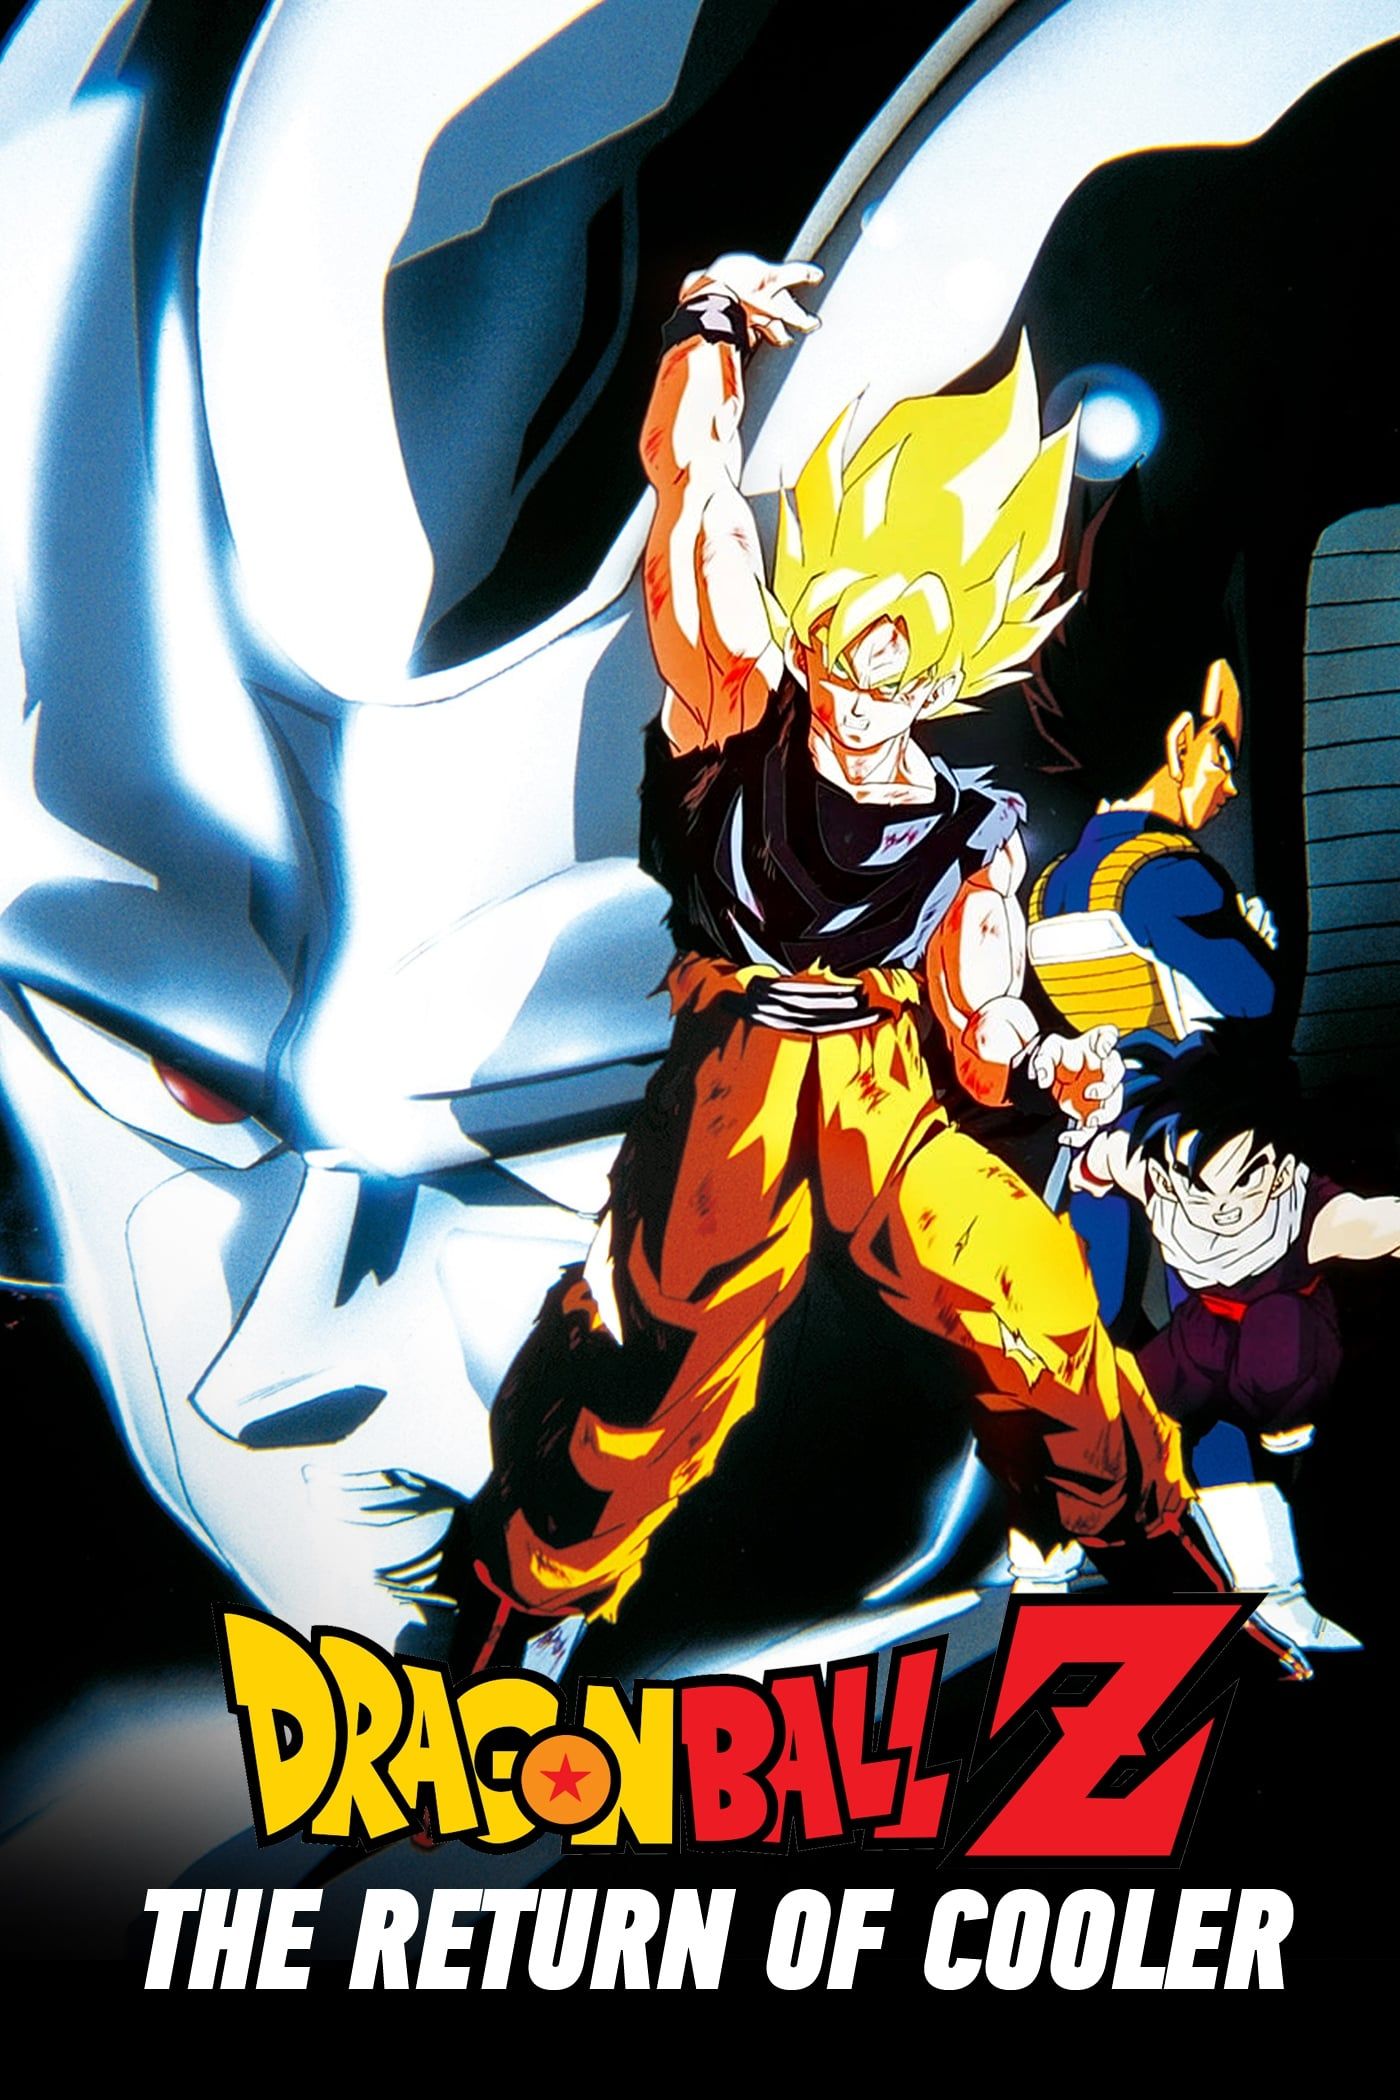 Dragon Ball Z: Super Android 13! (1992) directed by Daisuke Nishio